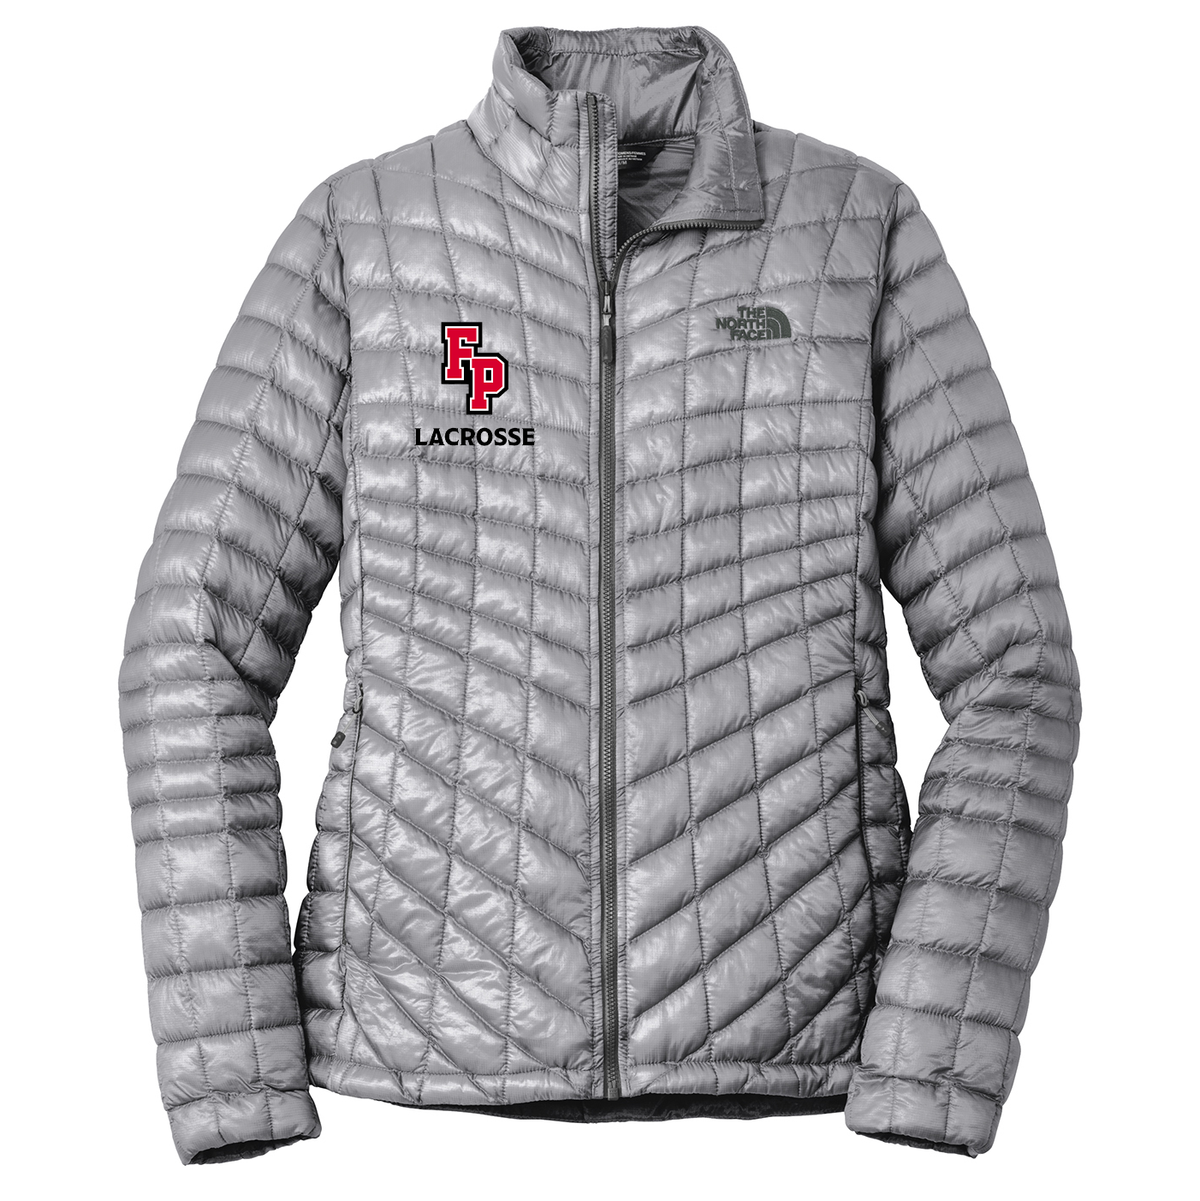 Floral Park Lacrosse The North Face Ladies ThermoBall Jacket